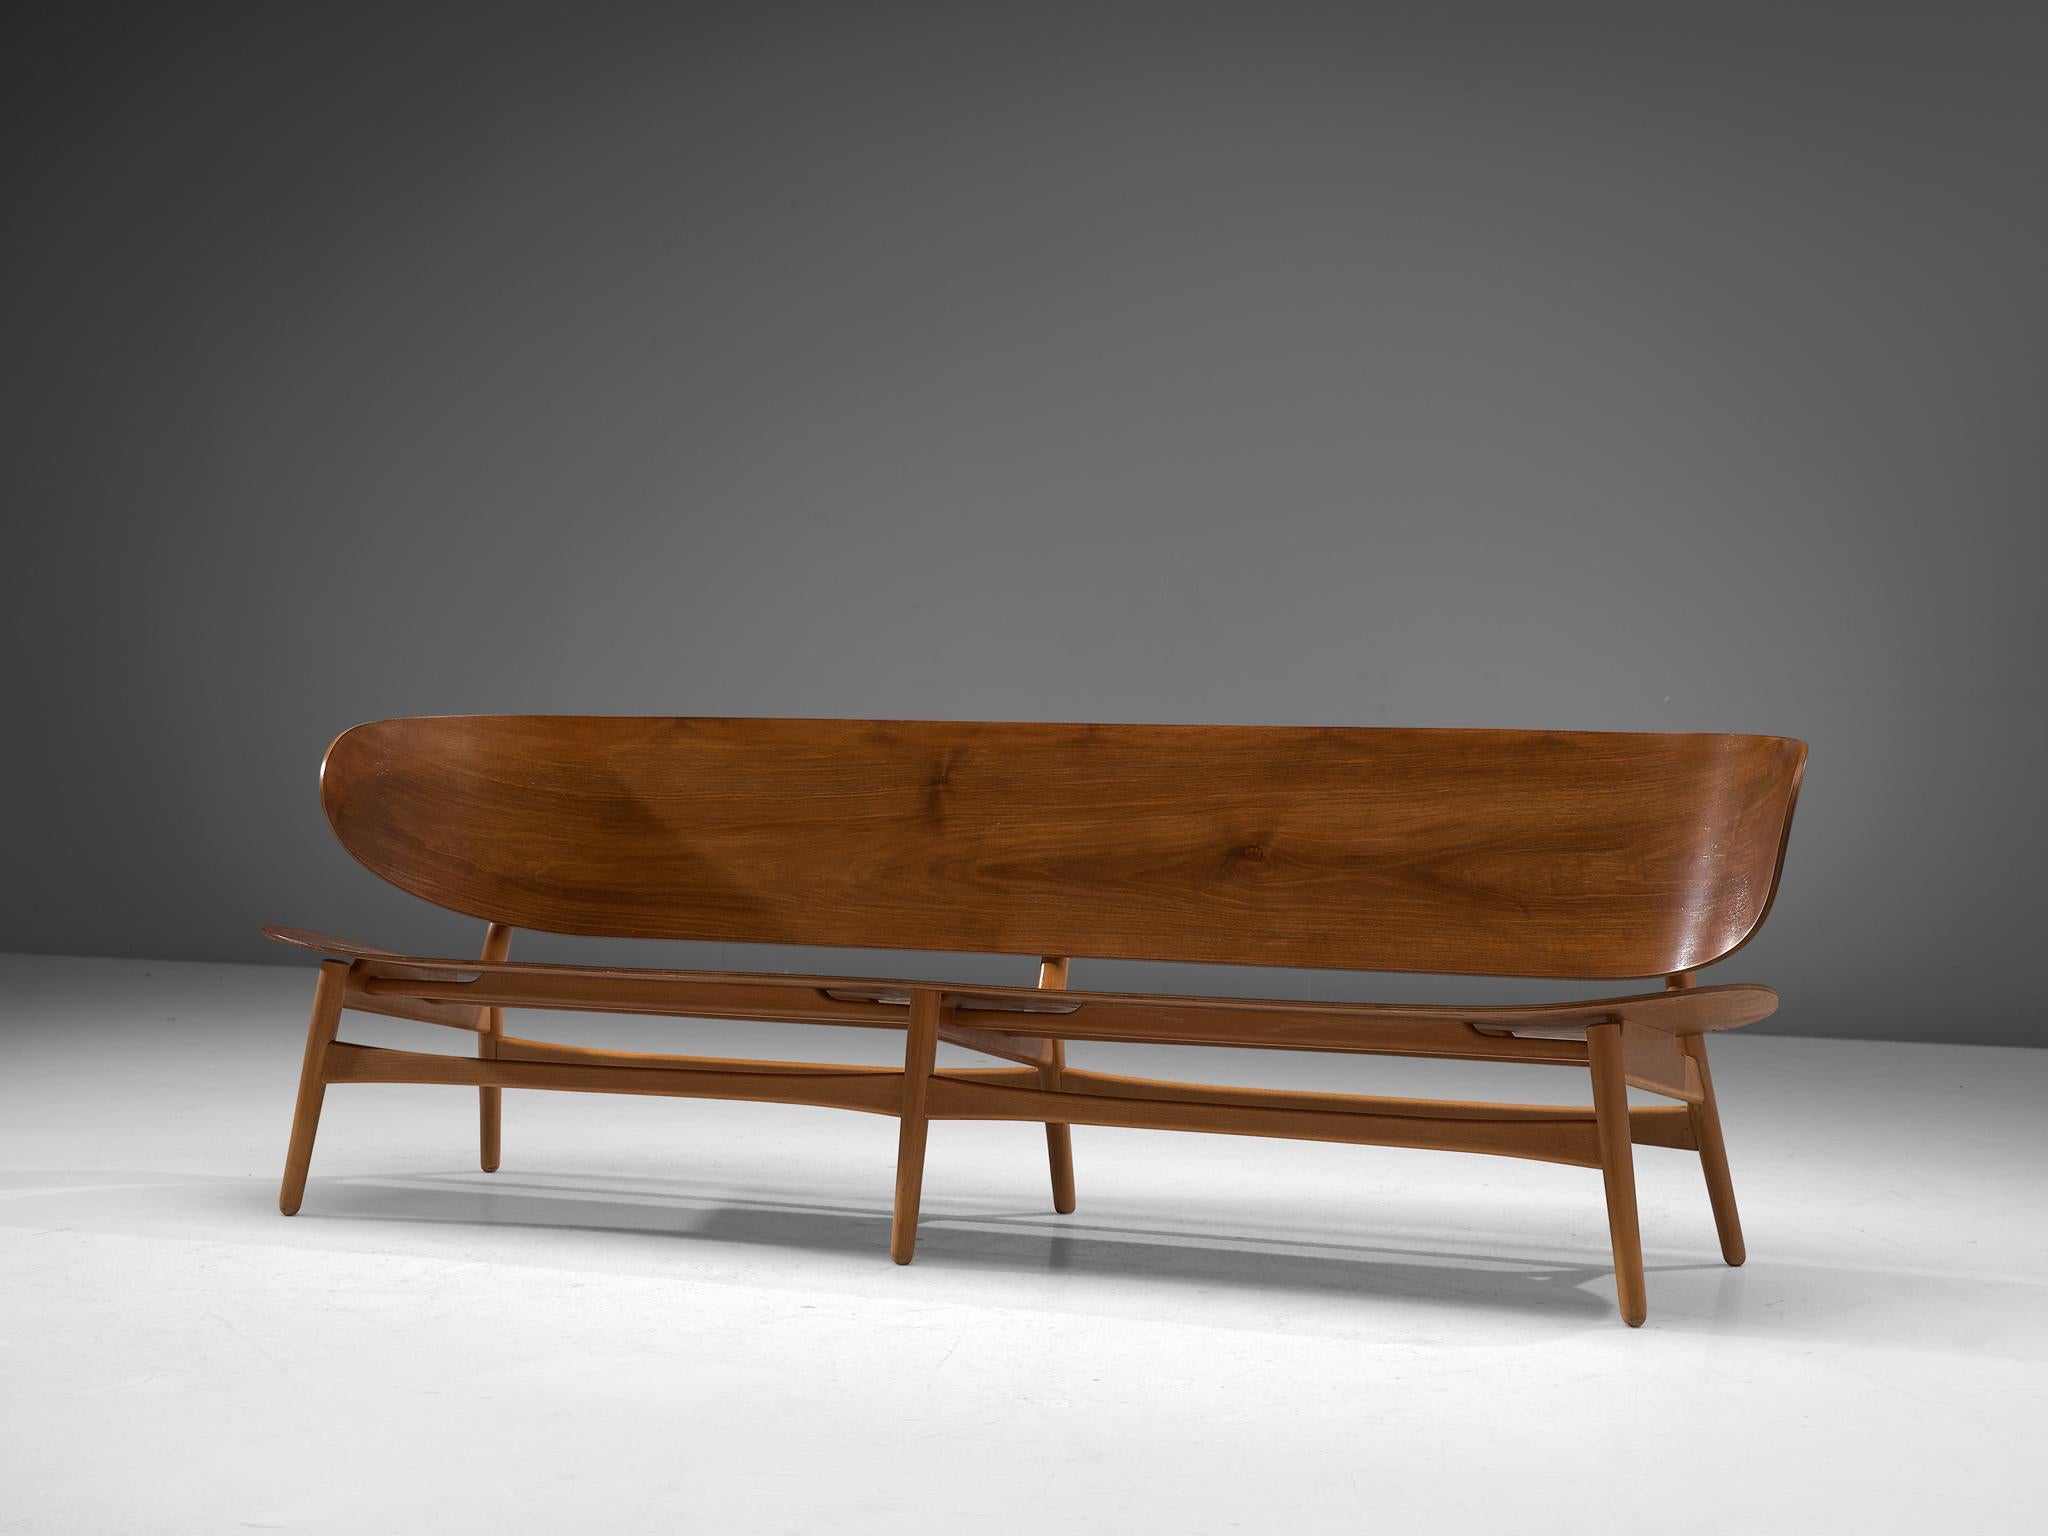 Hans J. Wegner for Fritz Hansen, FH 1935-1934 sofa bench, walnut and beech, Denmark, design 1948, manufactured, circa 1950.

This rare and largest version ever made of the FH 1935 sofa bench by Hans Wegner, this piece is one of the results of